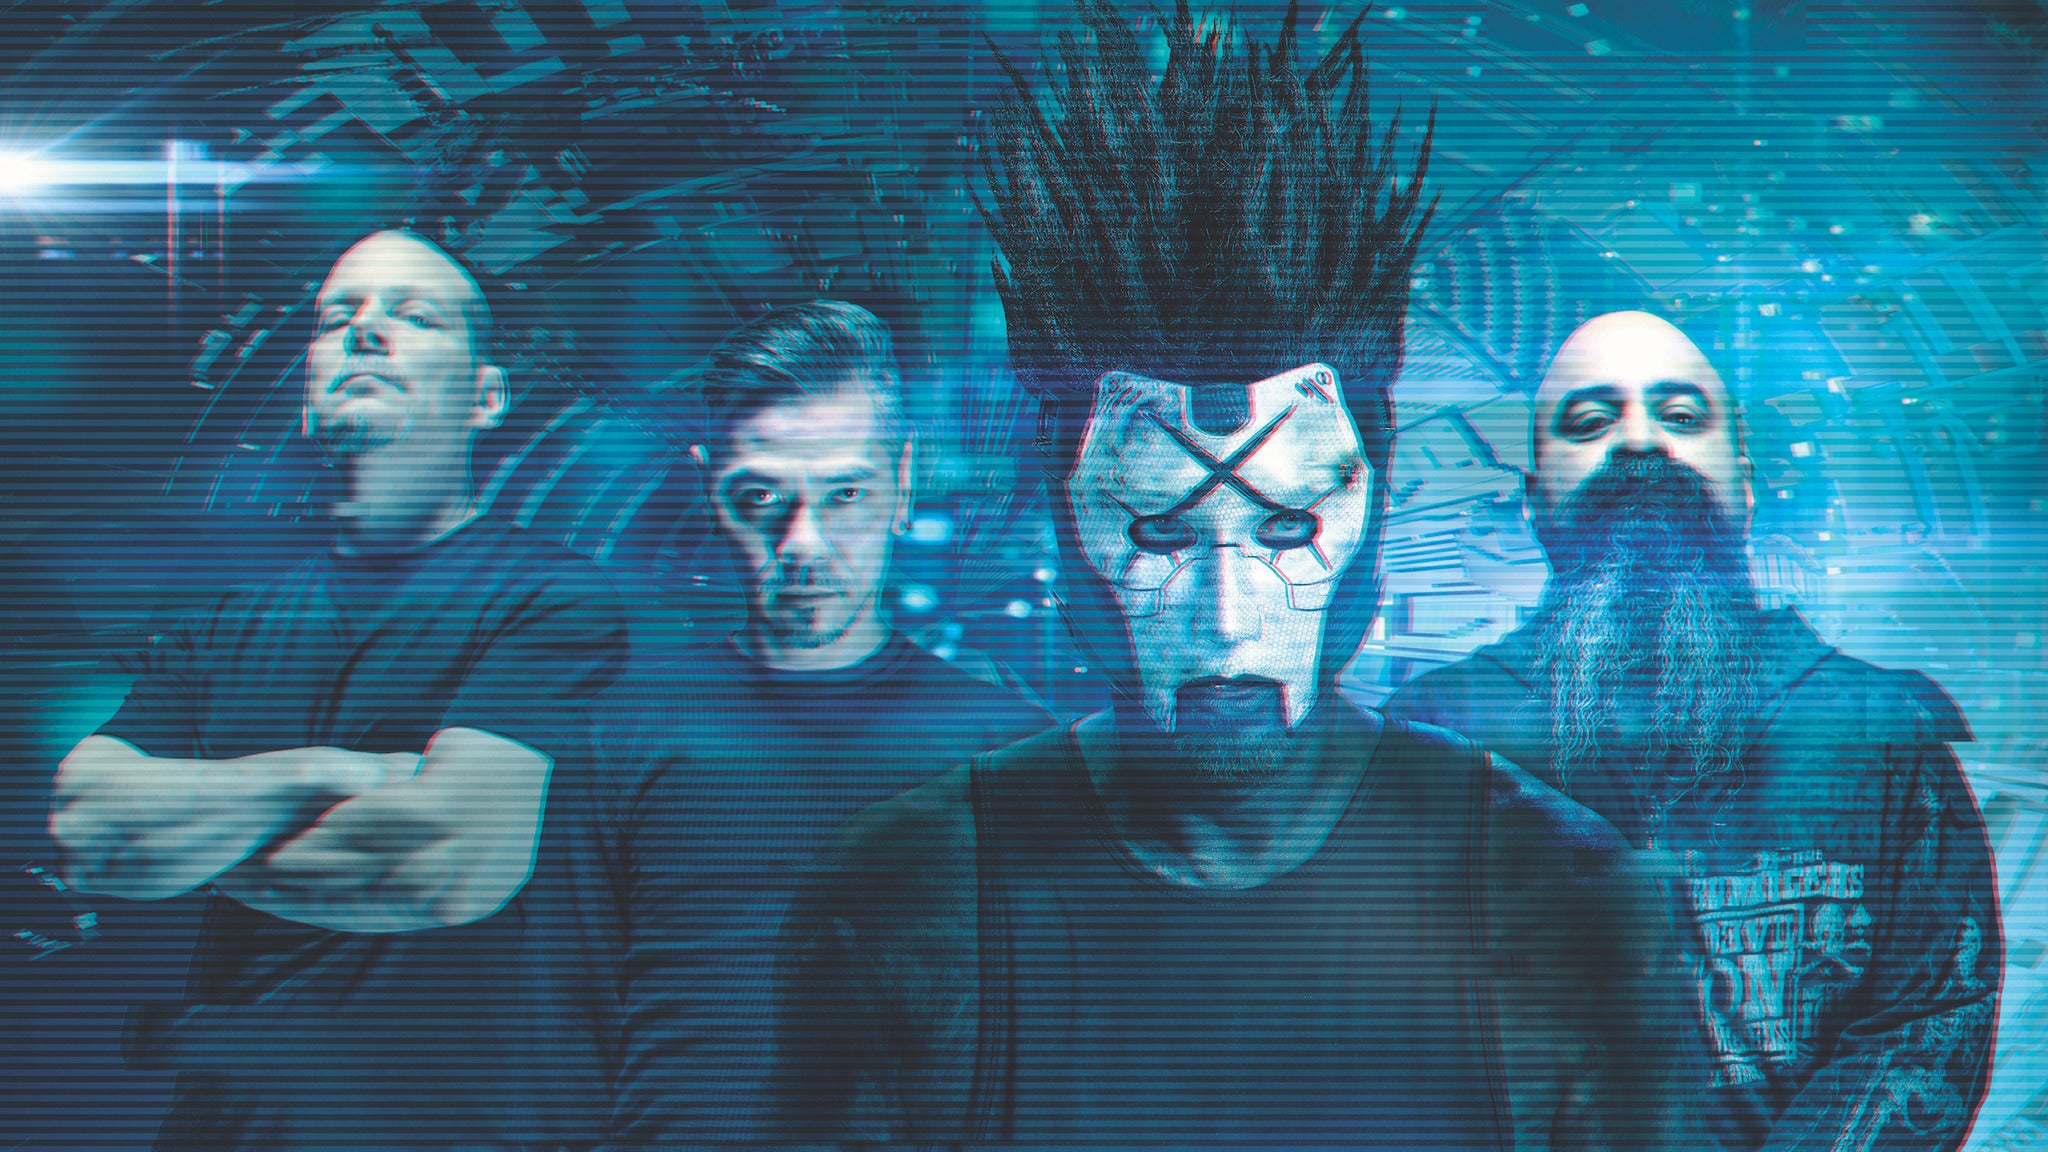 Static-X and Sevendust presale passcode for real tickets in Grand Rapids